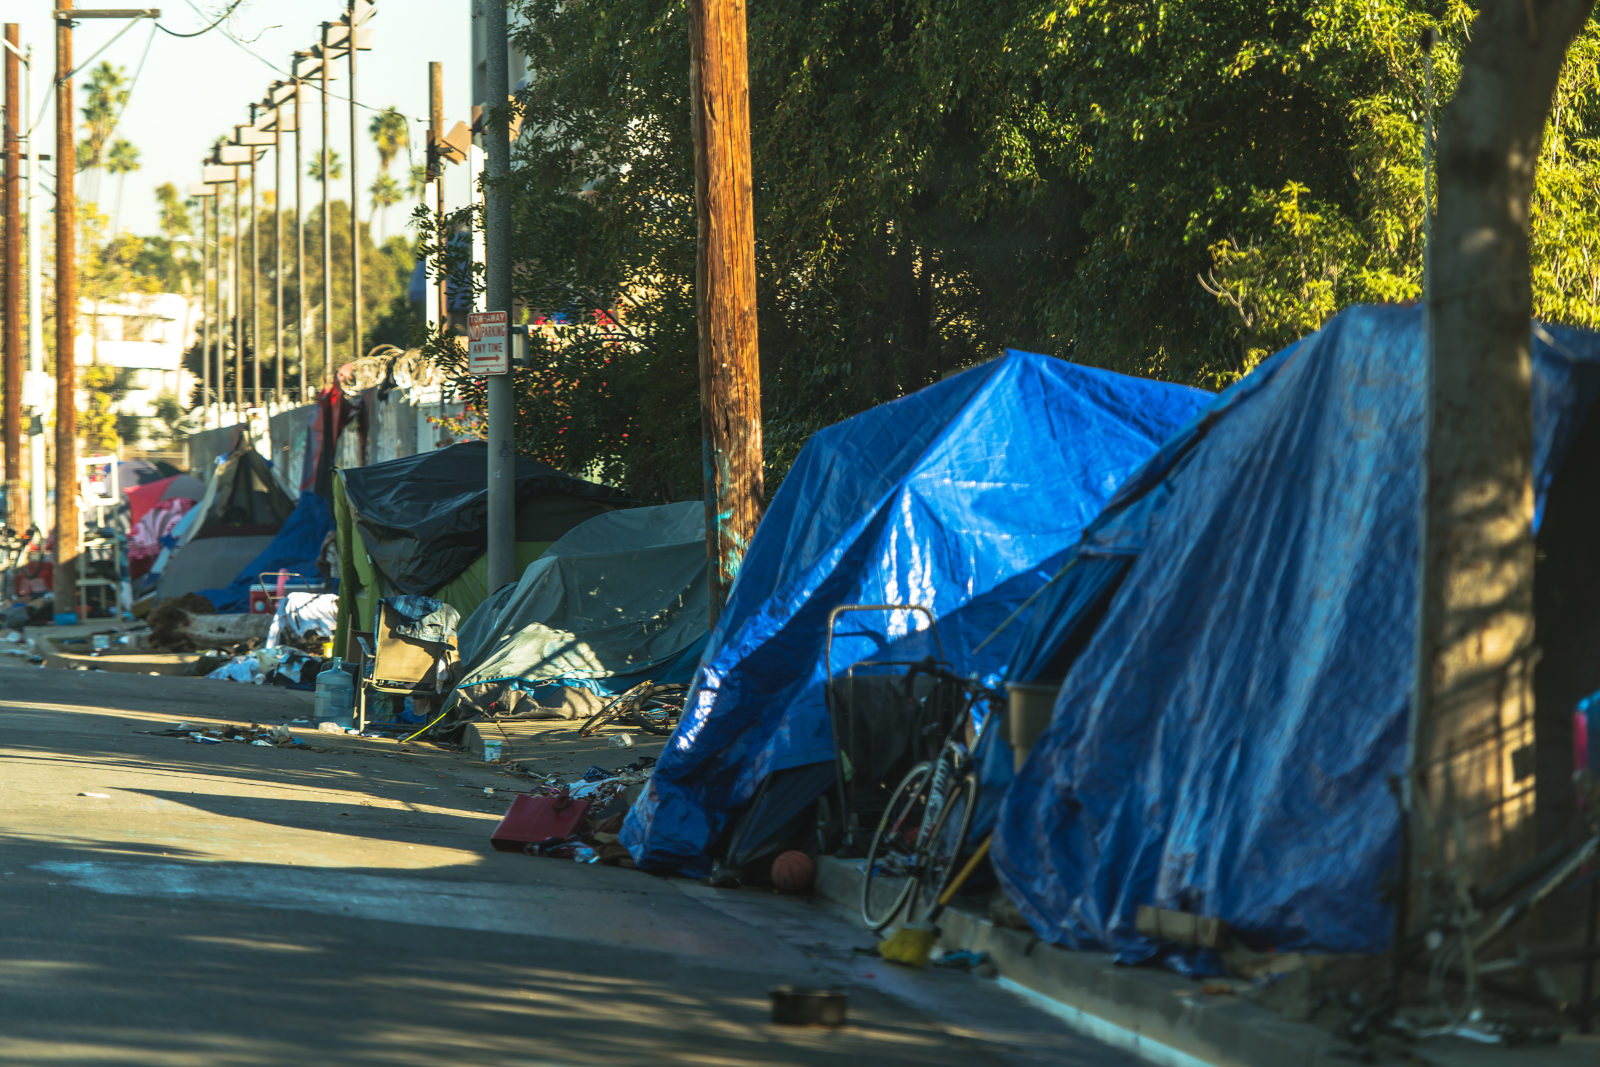 West Hollywood Homelessness Wild Tents Camp